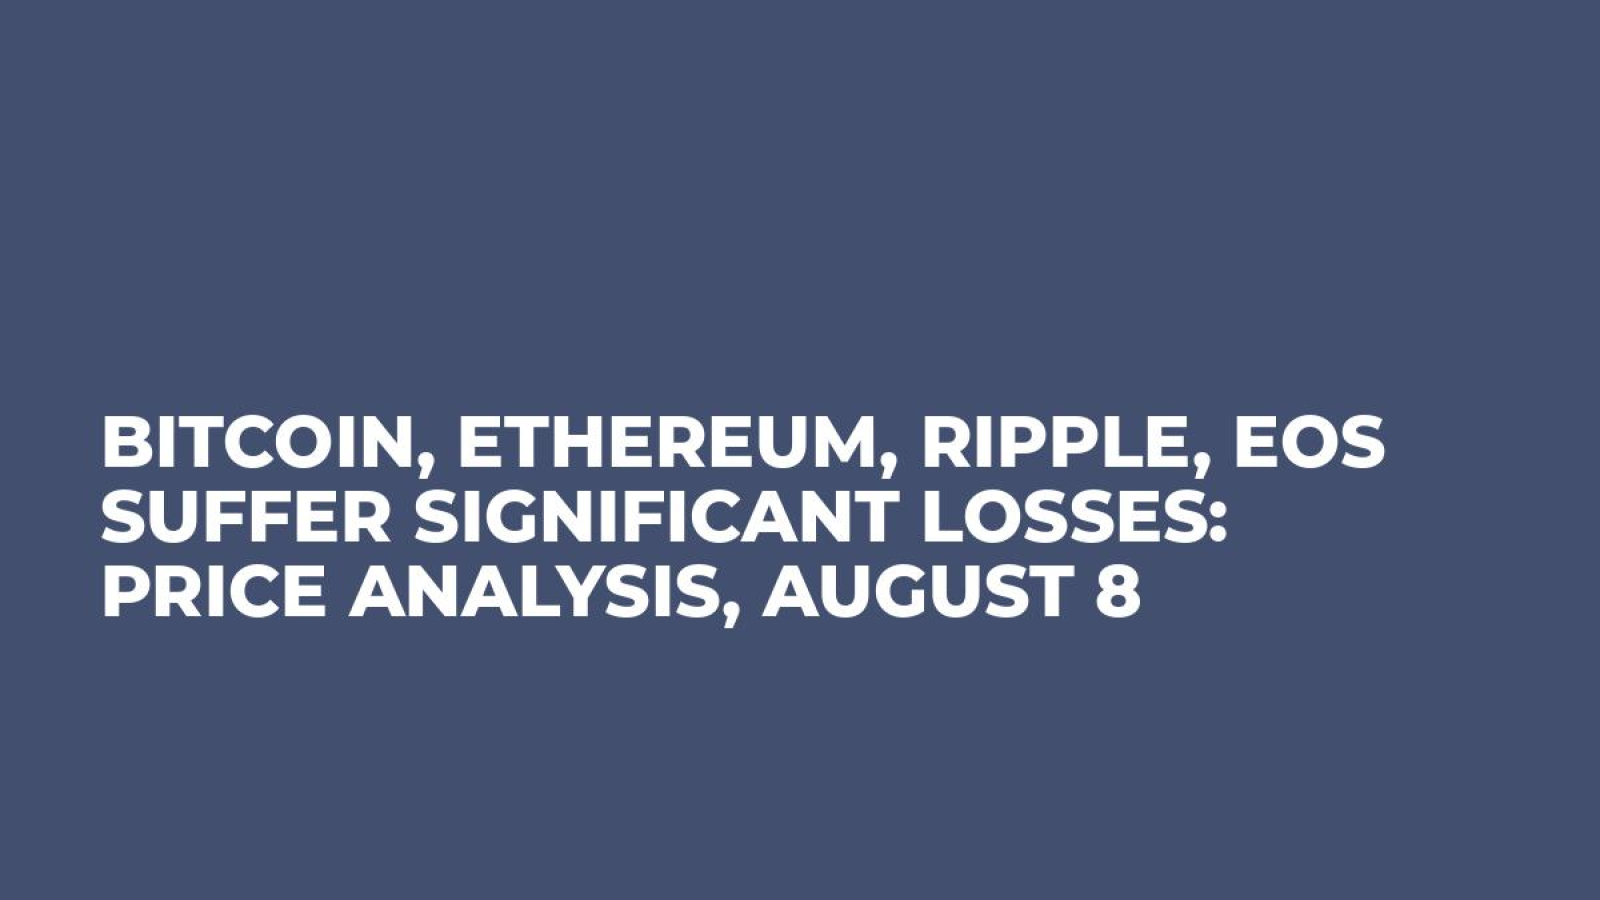 Bitcoin, Ethereum, Ripple, EOS Suffer Significant Losses: Price Analysis, August 8